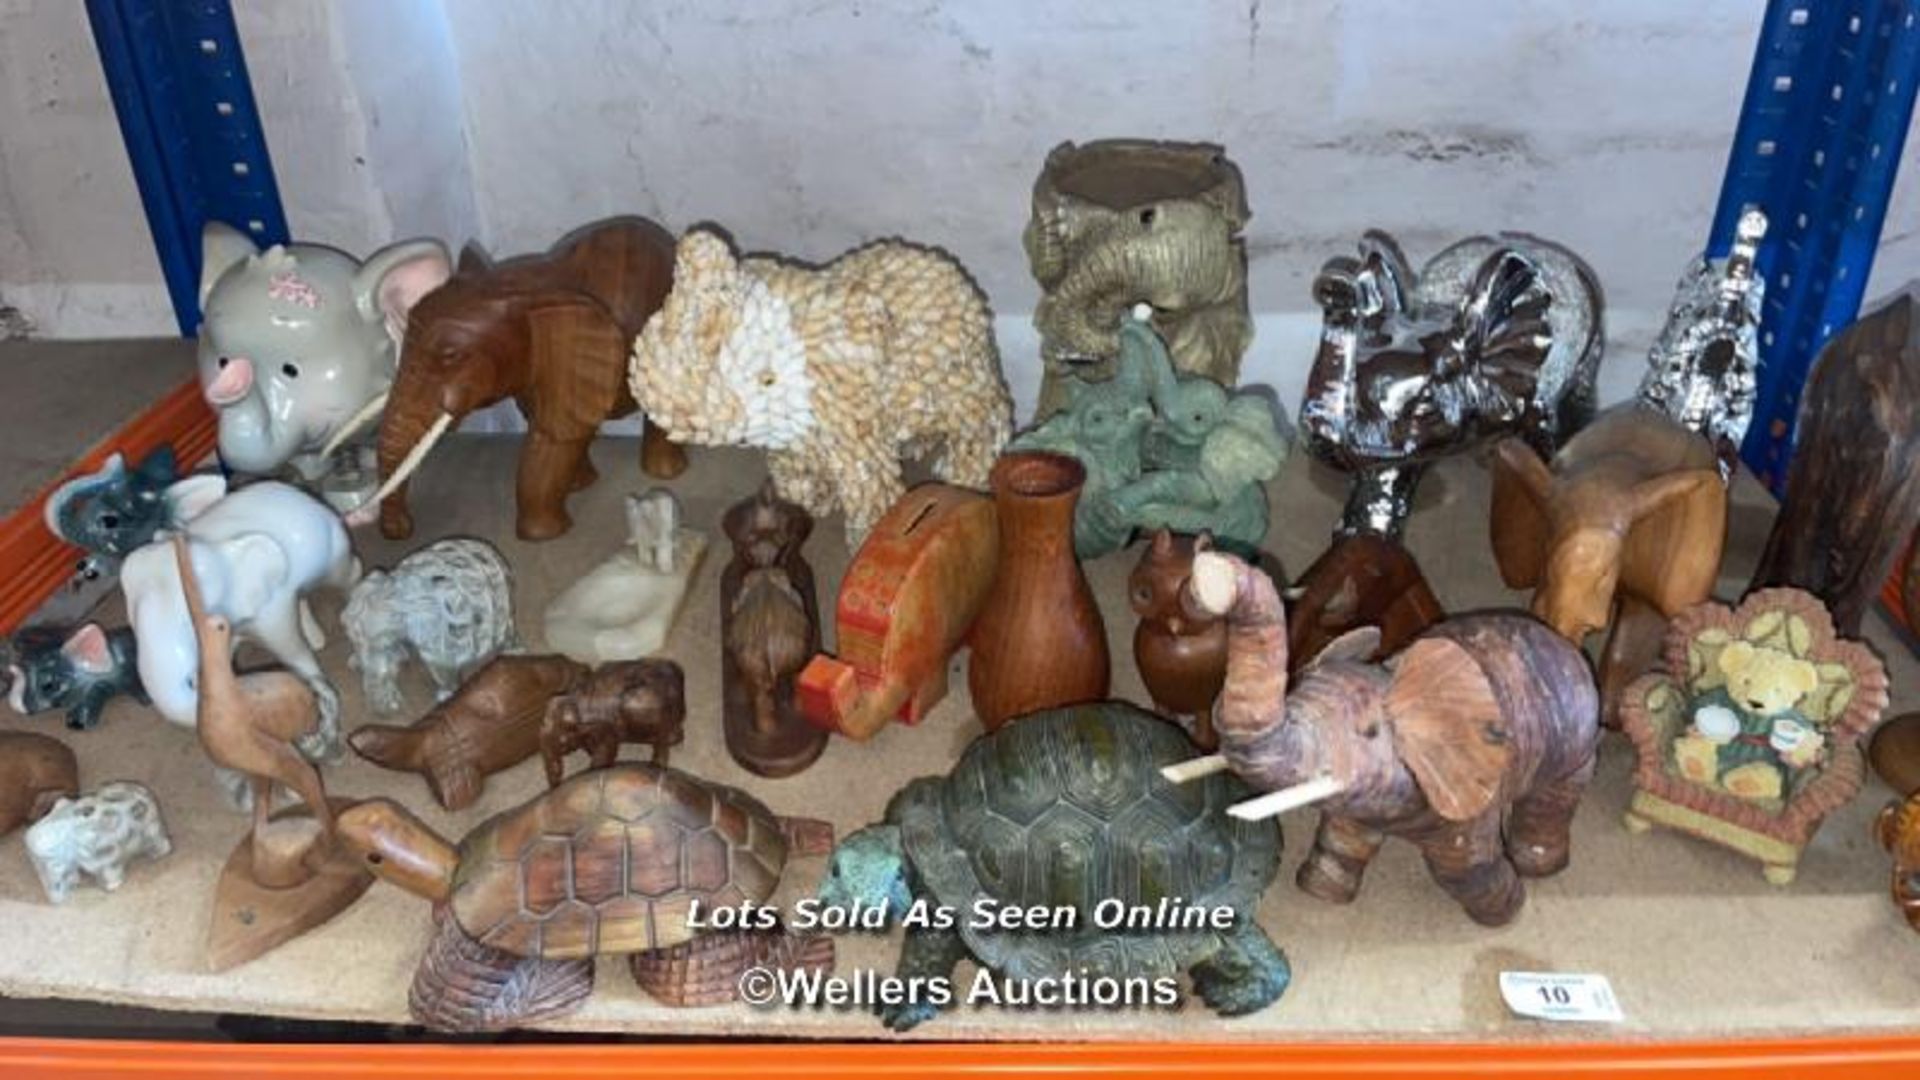 ASSORTED BRIC-A-BRAC INCLUDING COLLECTABLE ELEPHANTS AND WOODEN ANIMALS